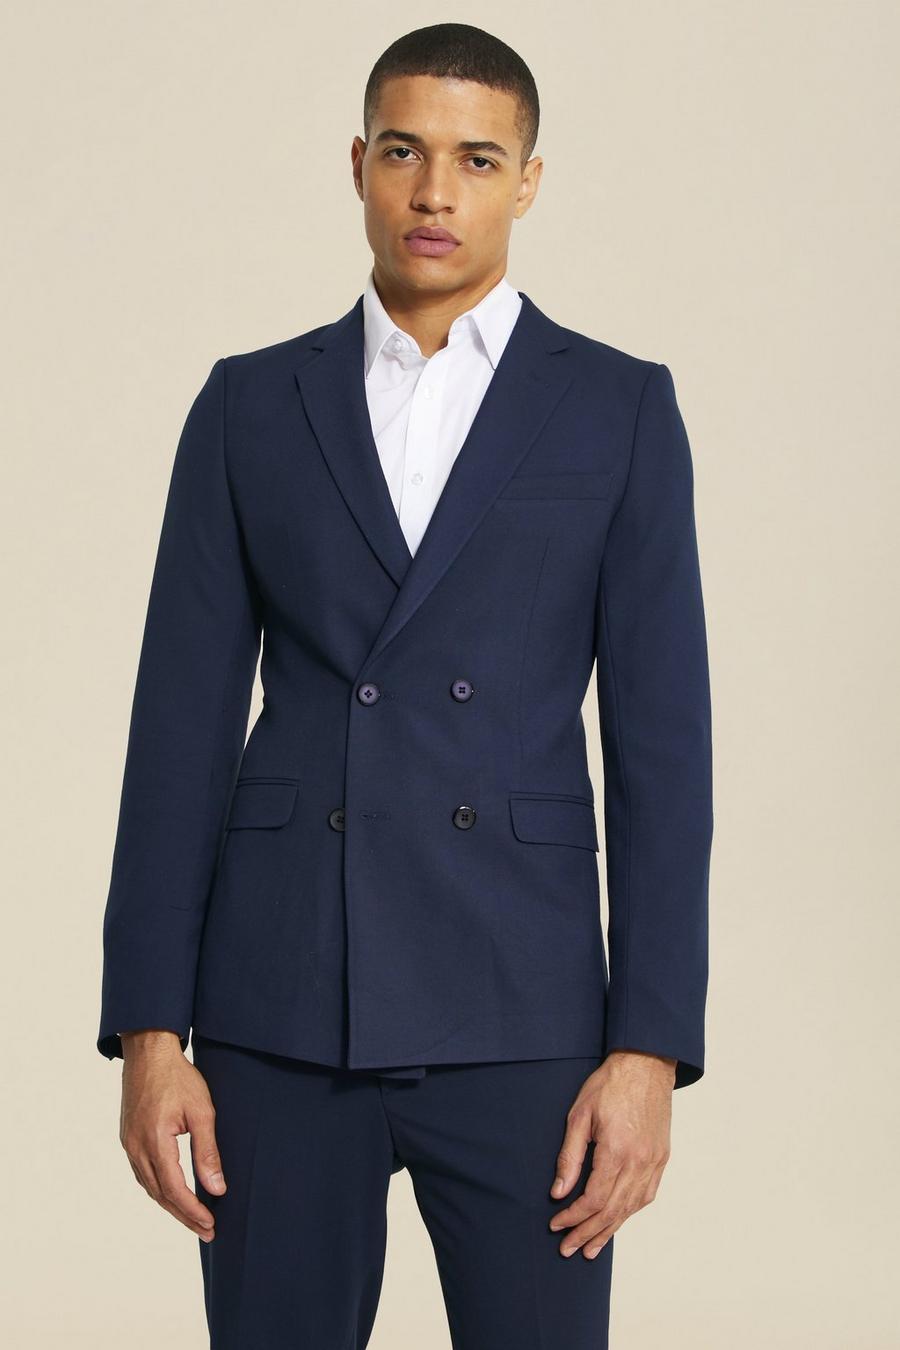 - Save 14% Boohoo Skinny Double Breasted Suit Jacket in Navy Womens Mens Clothing Mens Jackets Blazers Blue 